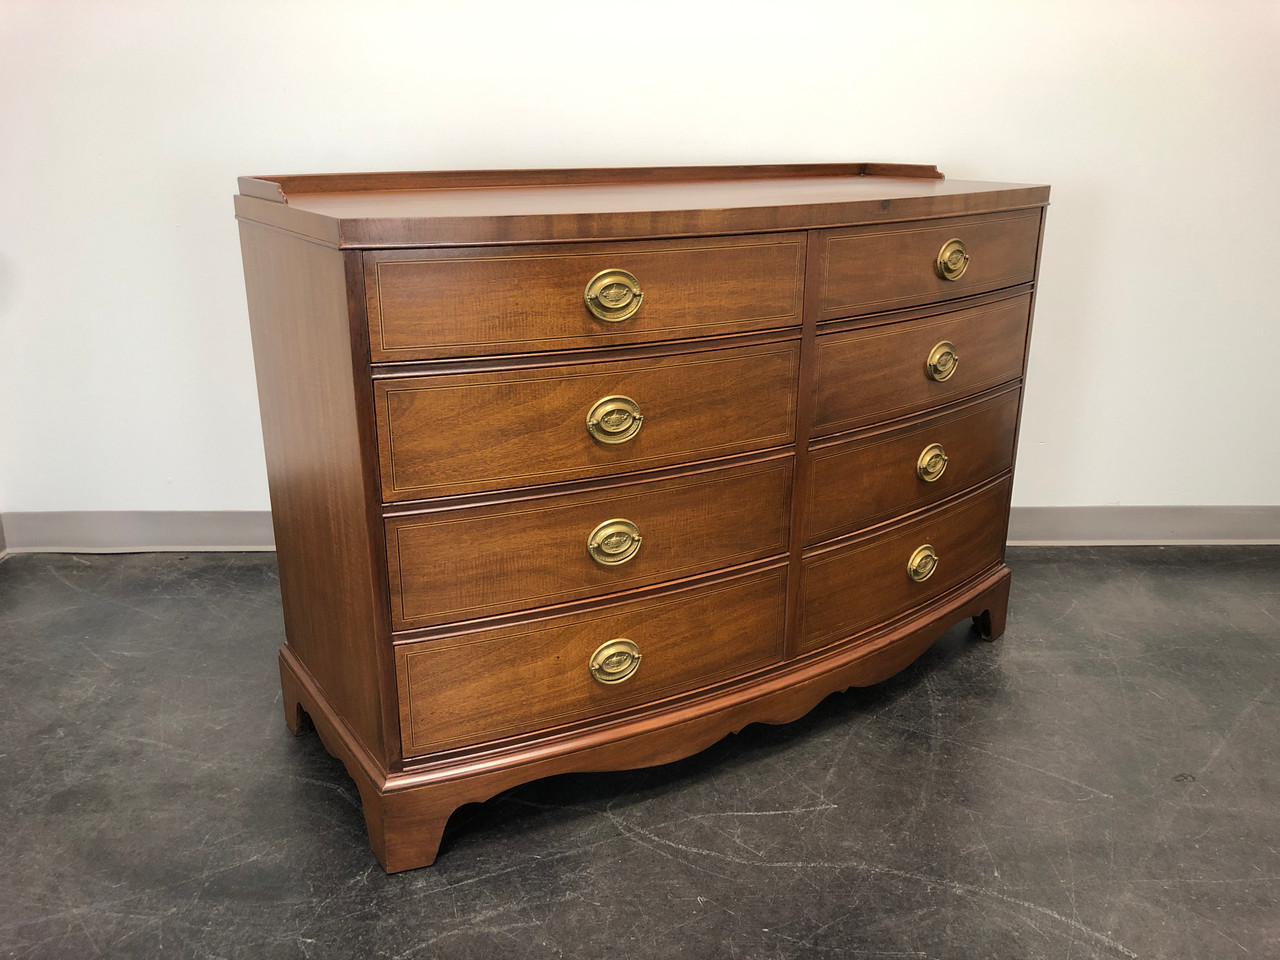 Sold Drexel Inlaid Mahogany Bow Front 8 Drawer Dresser Chest